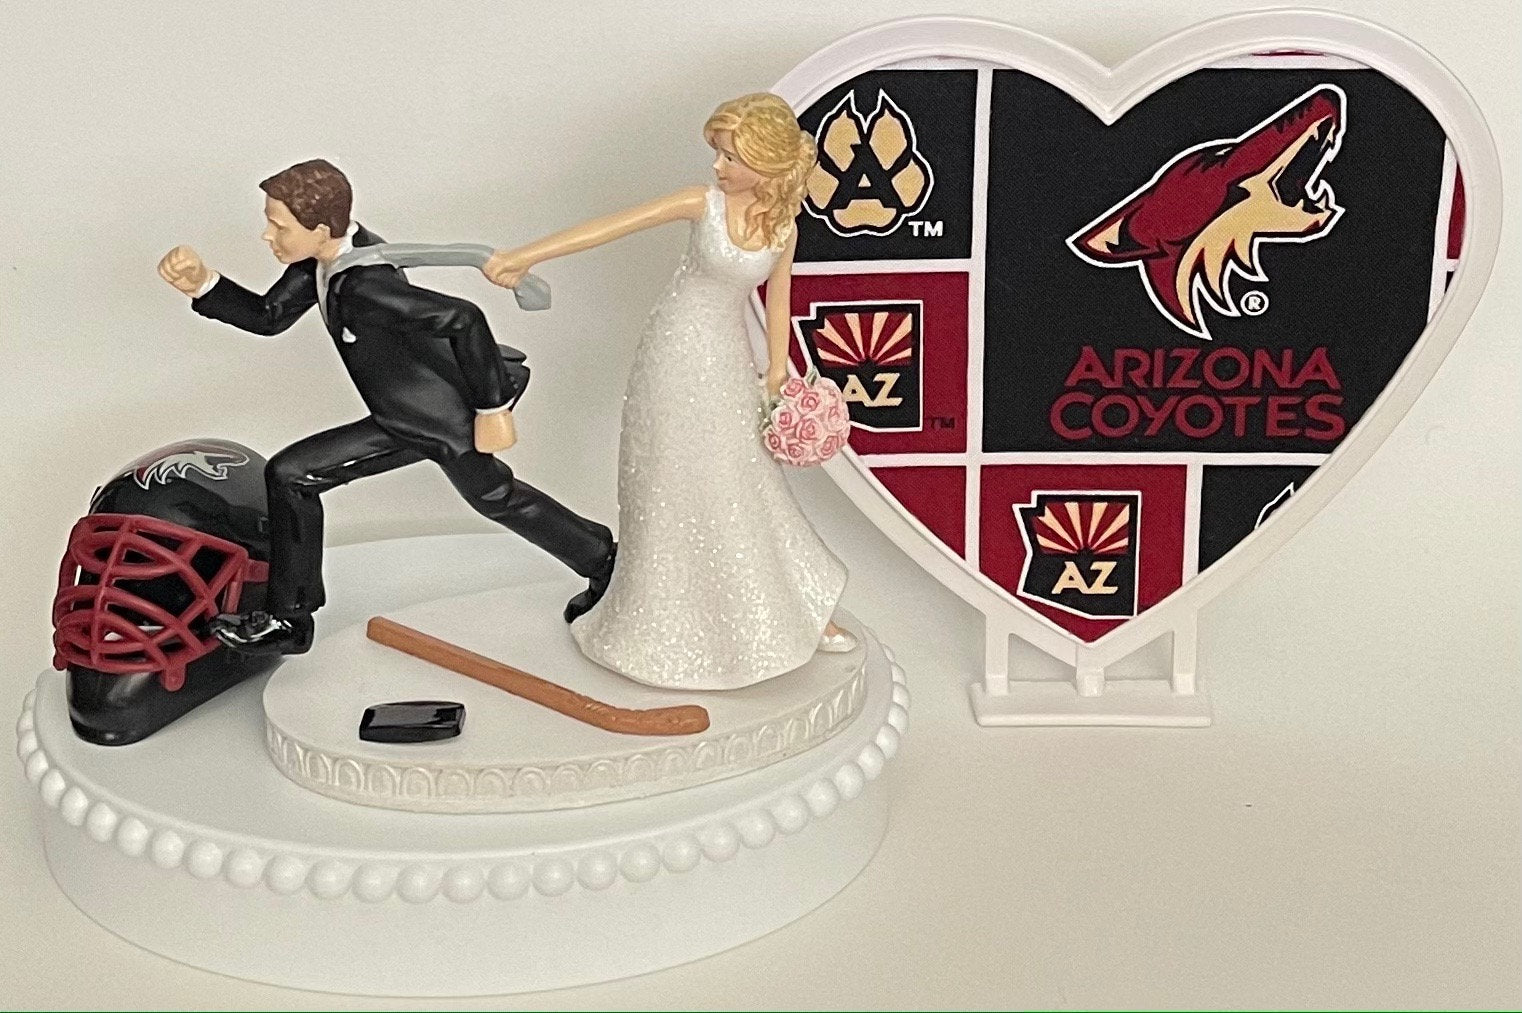 Wedding Cake Topper Arizona Coyotes Hockey Themed Running Funny Humorous Bride Groom Unique Sports Fans Reception Fun Groom's Cake Top Gift